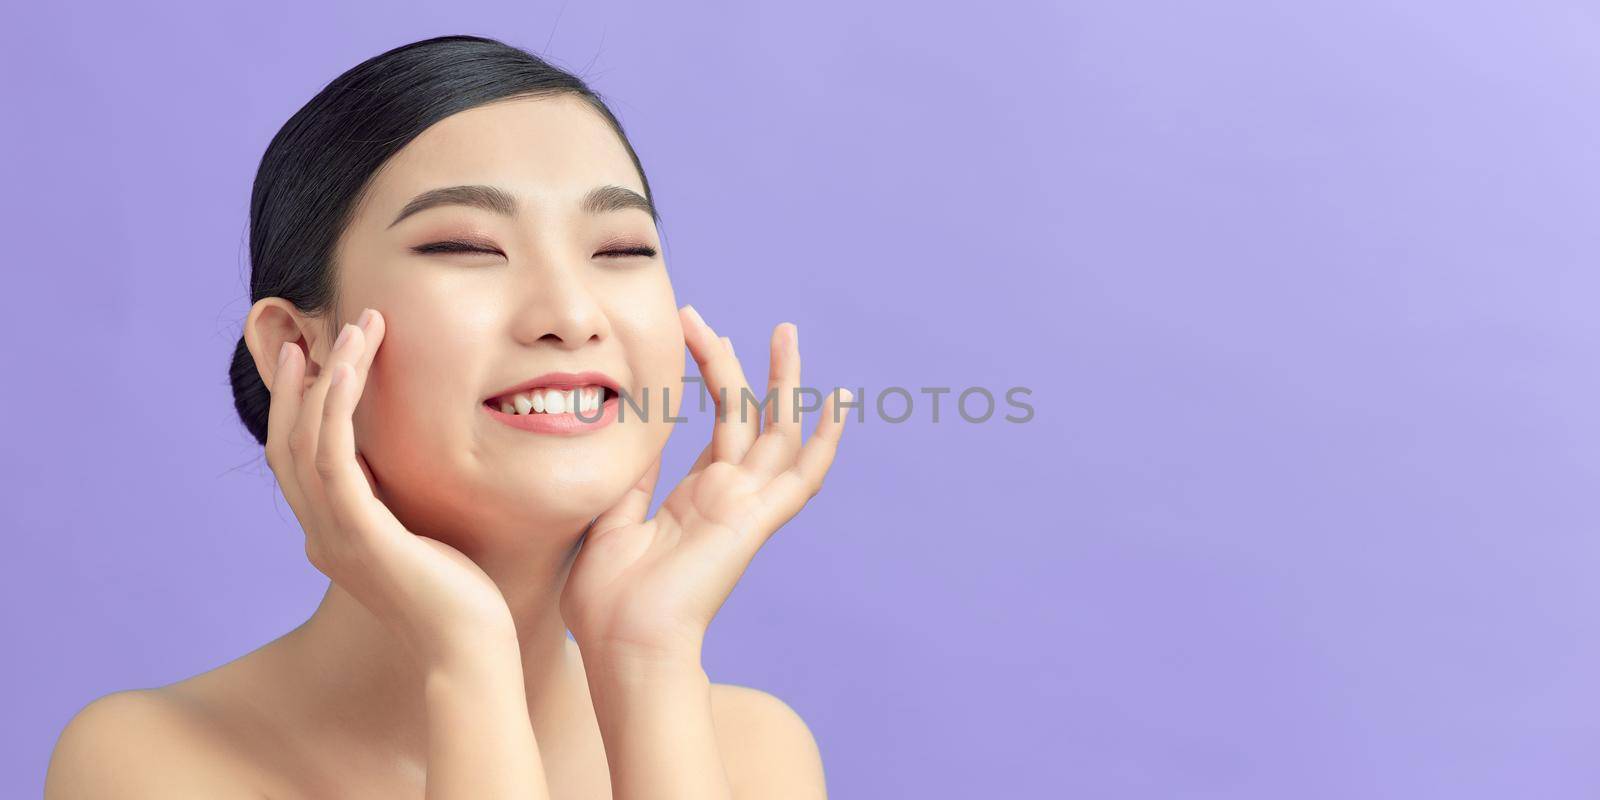 Woman with beauty face touching healthy facial skin portrait